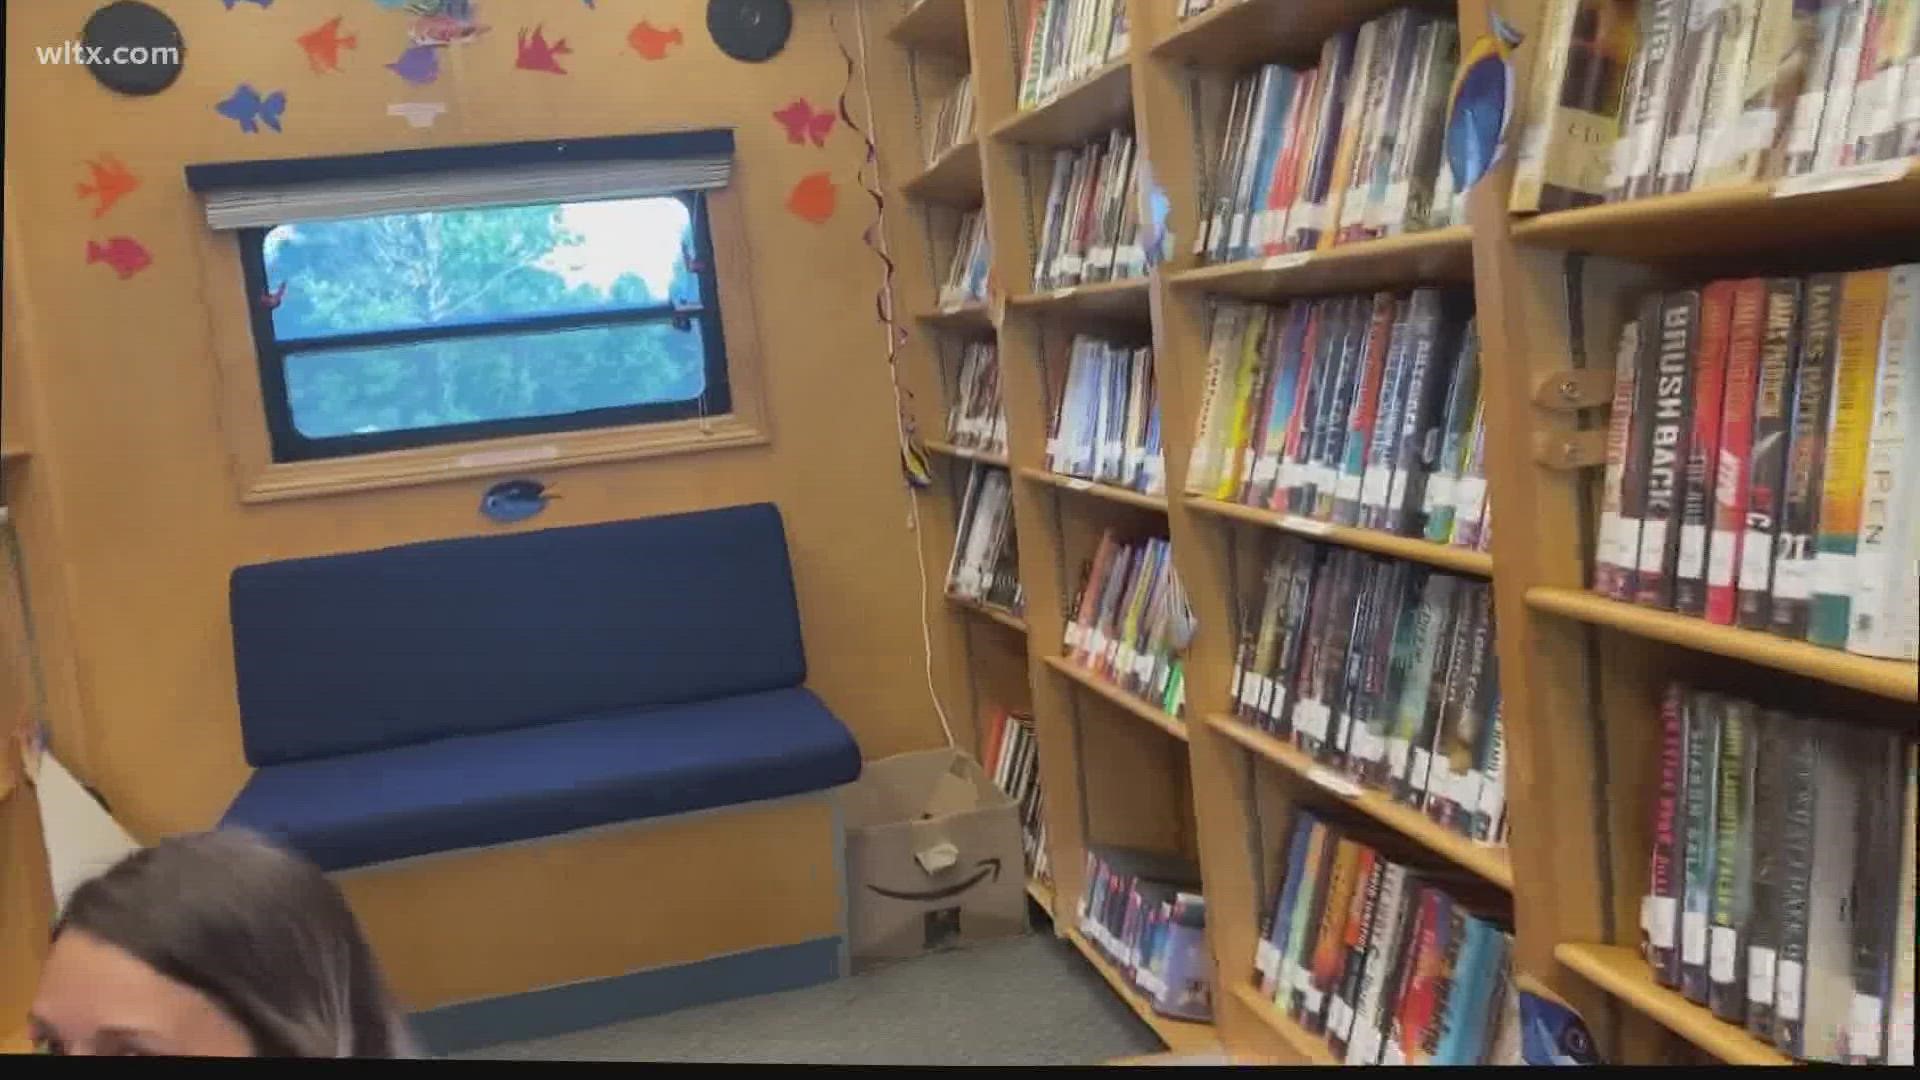 The 'rolling library' has plans to get to all communities in the Orangeburg area.